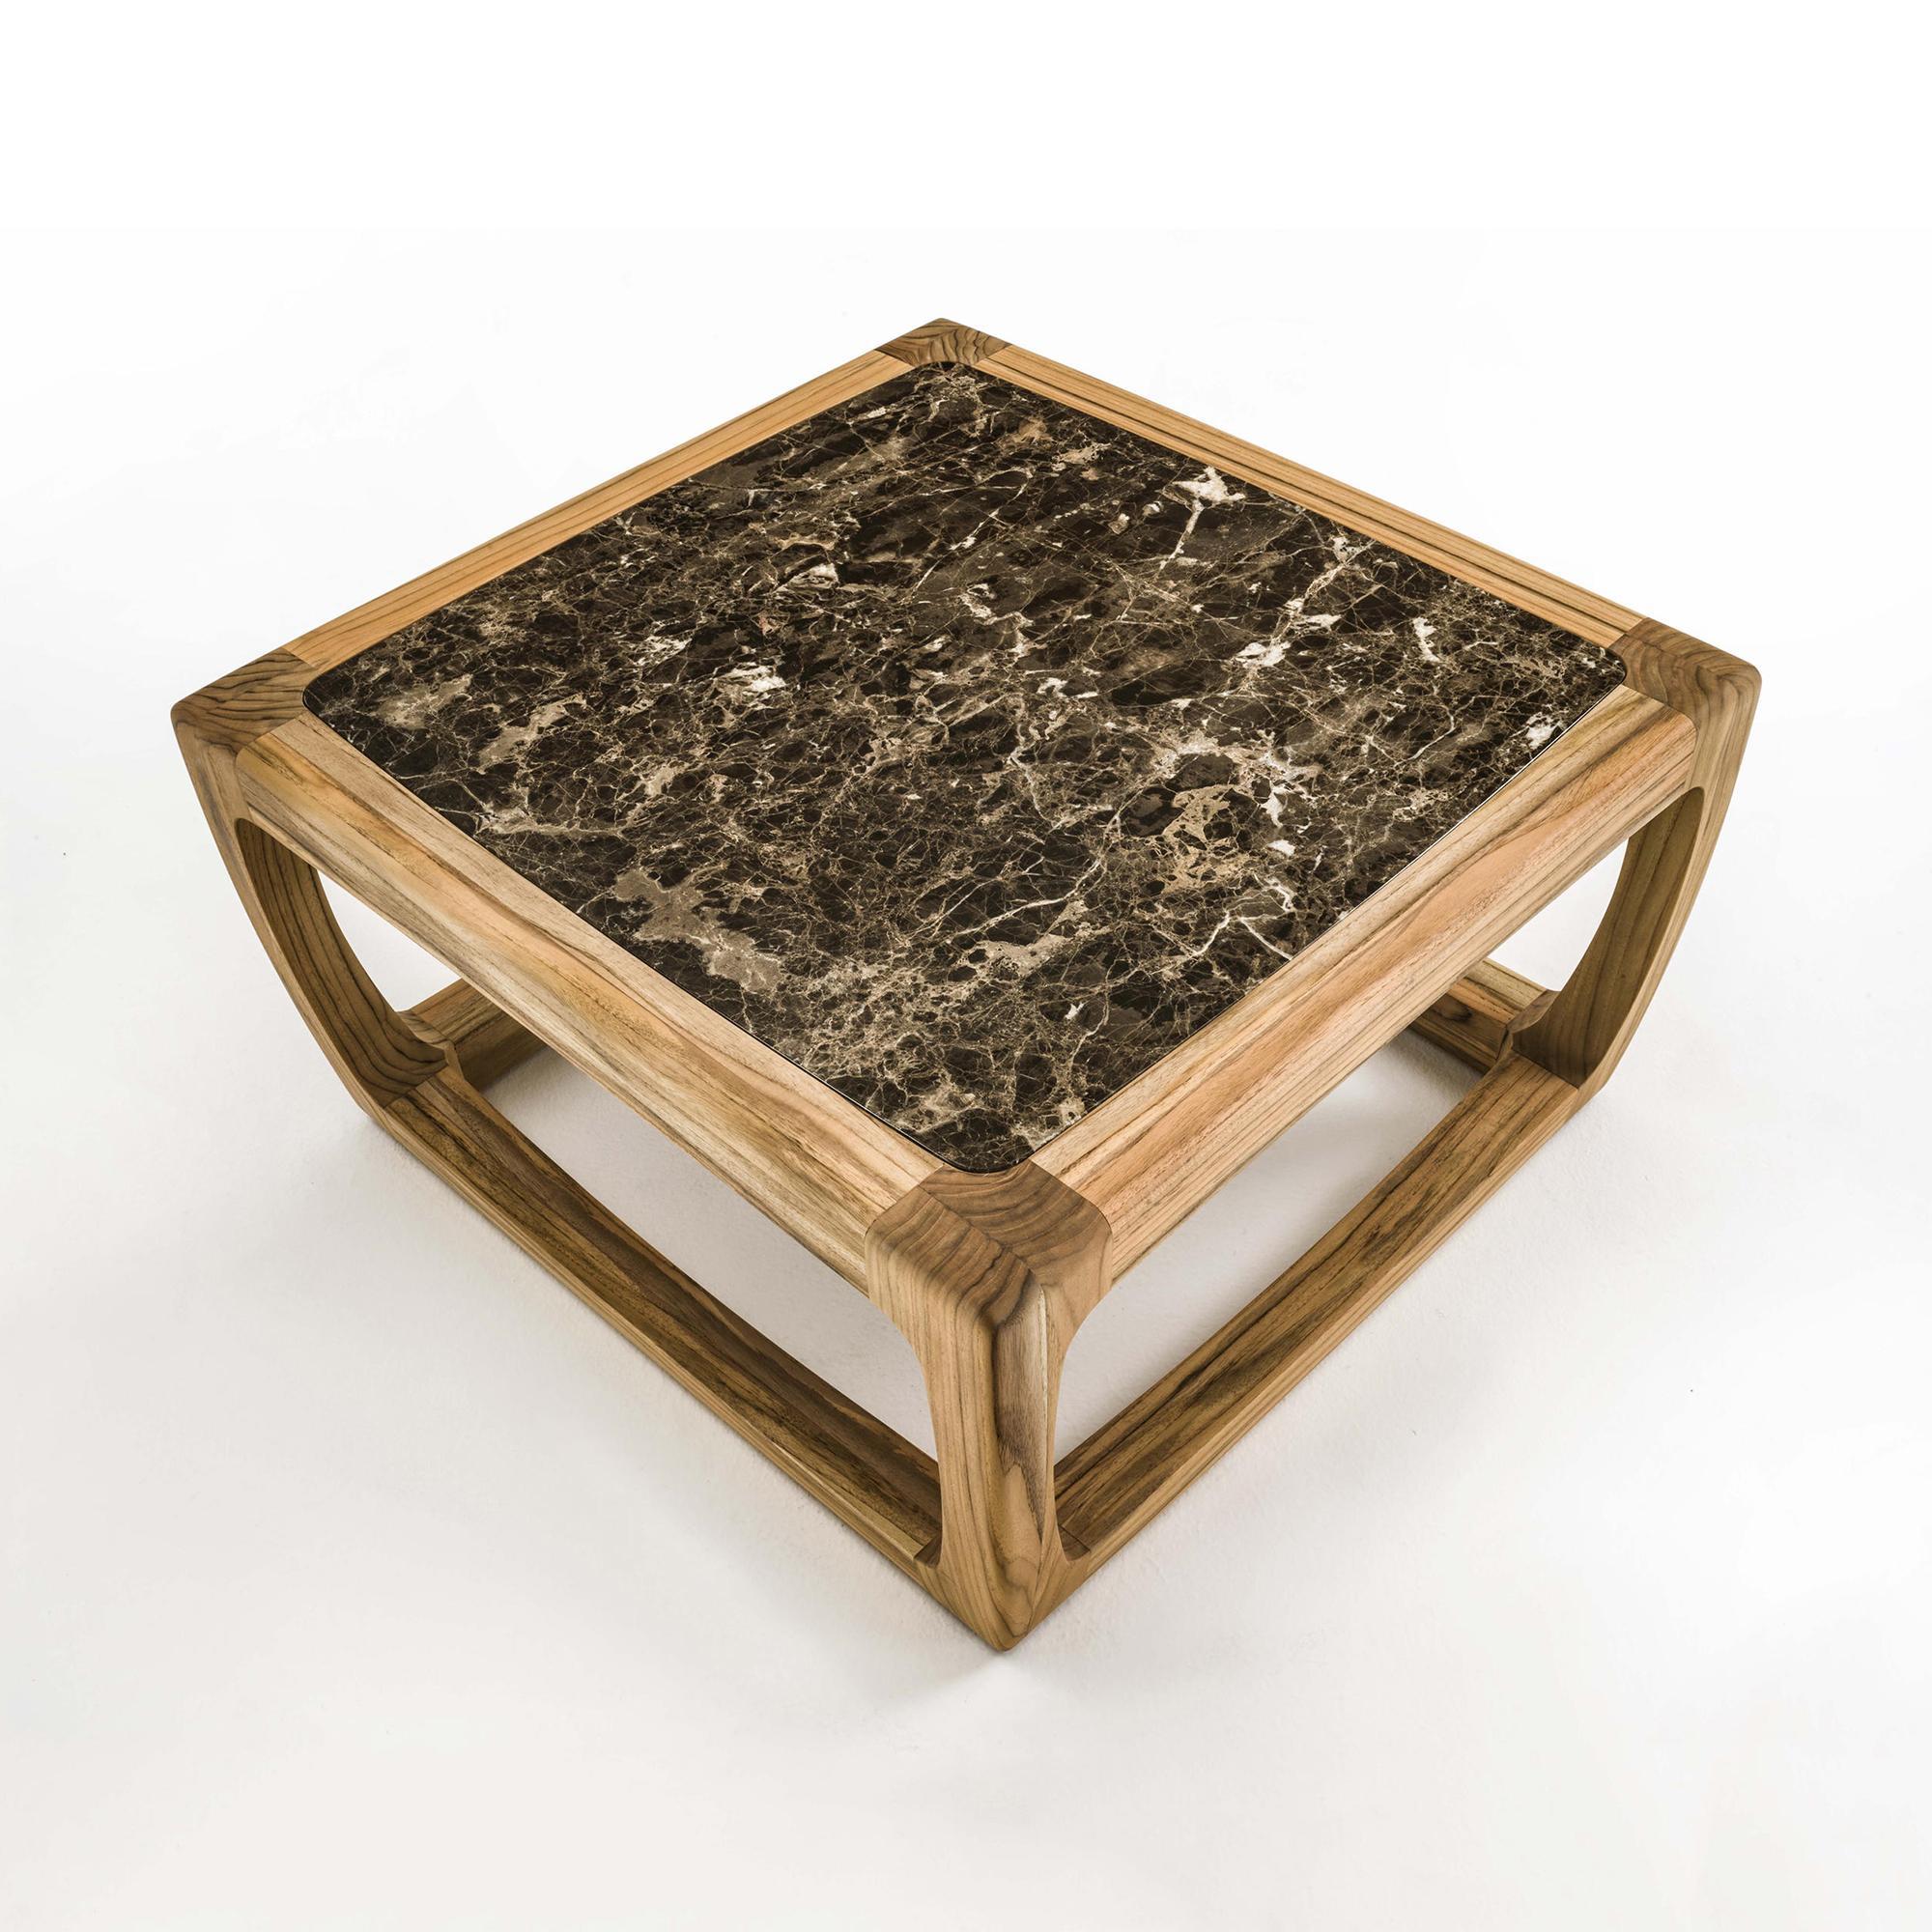 Coffee table trooper outdoor or indoor with structure in
solid natural teak, with brown emperador polished marble top.
Wood treated with natural pine extracts.
Also available in Trooper center table.